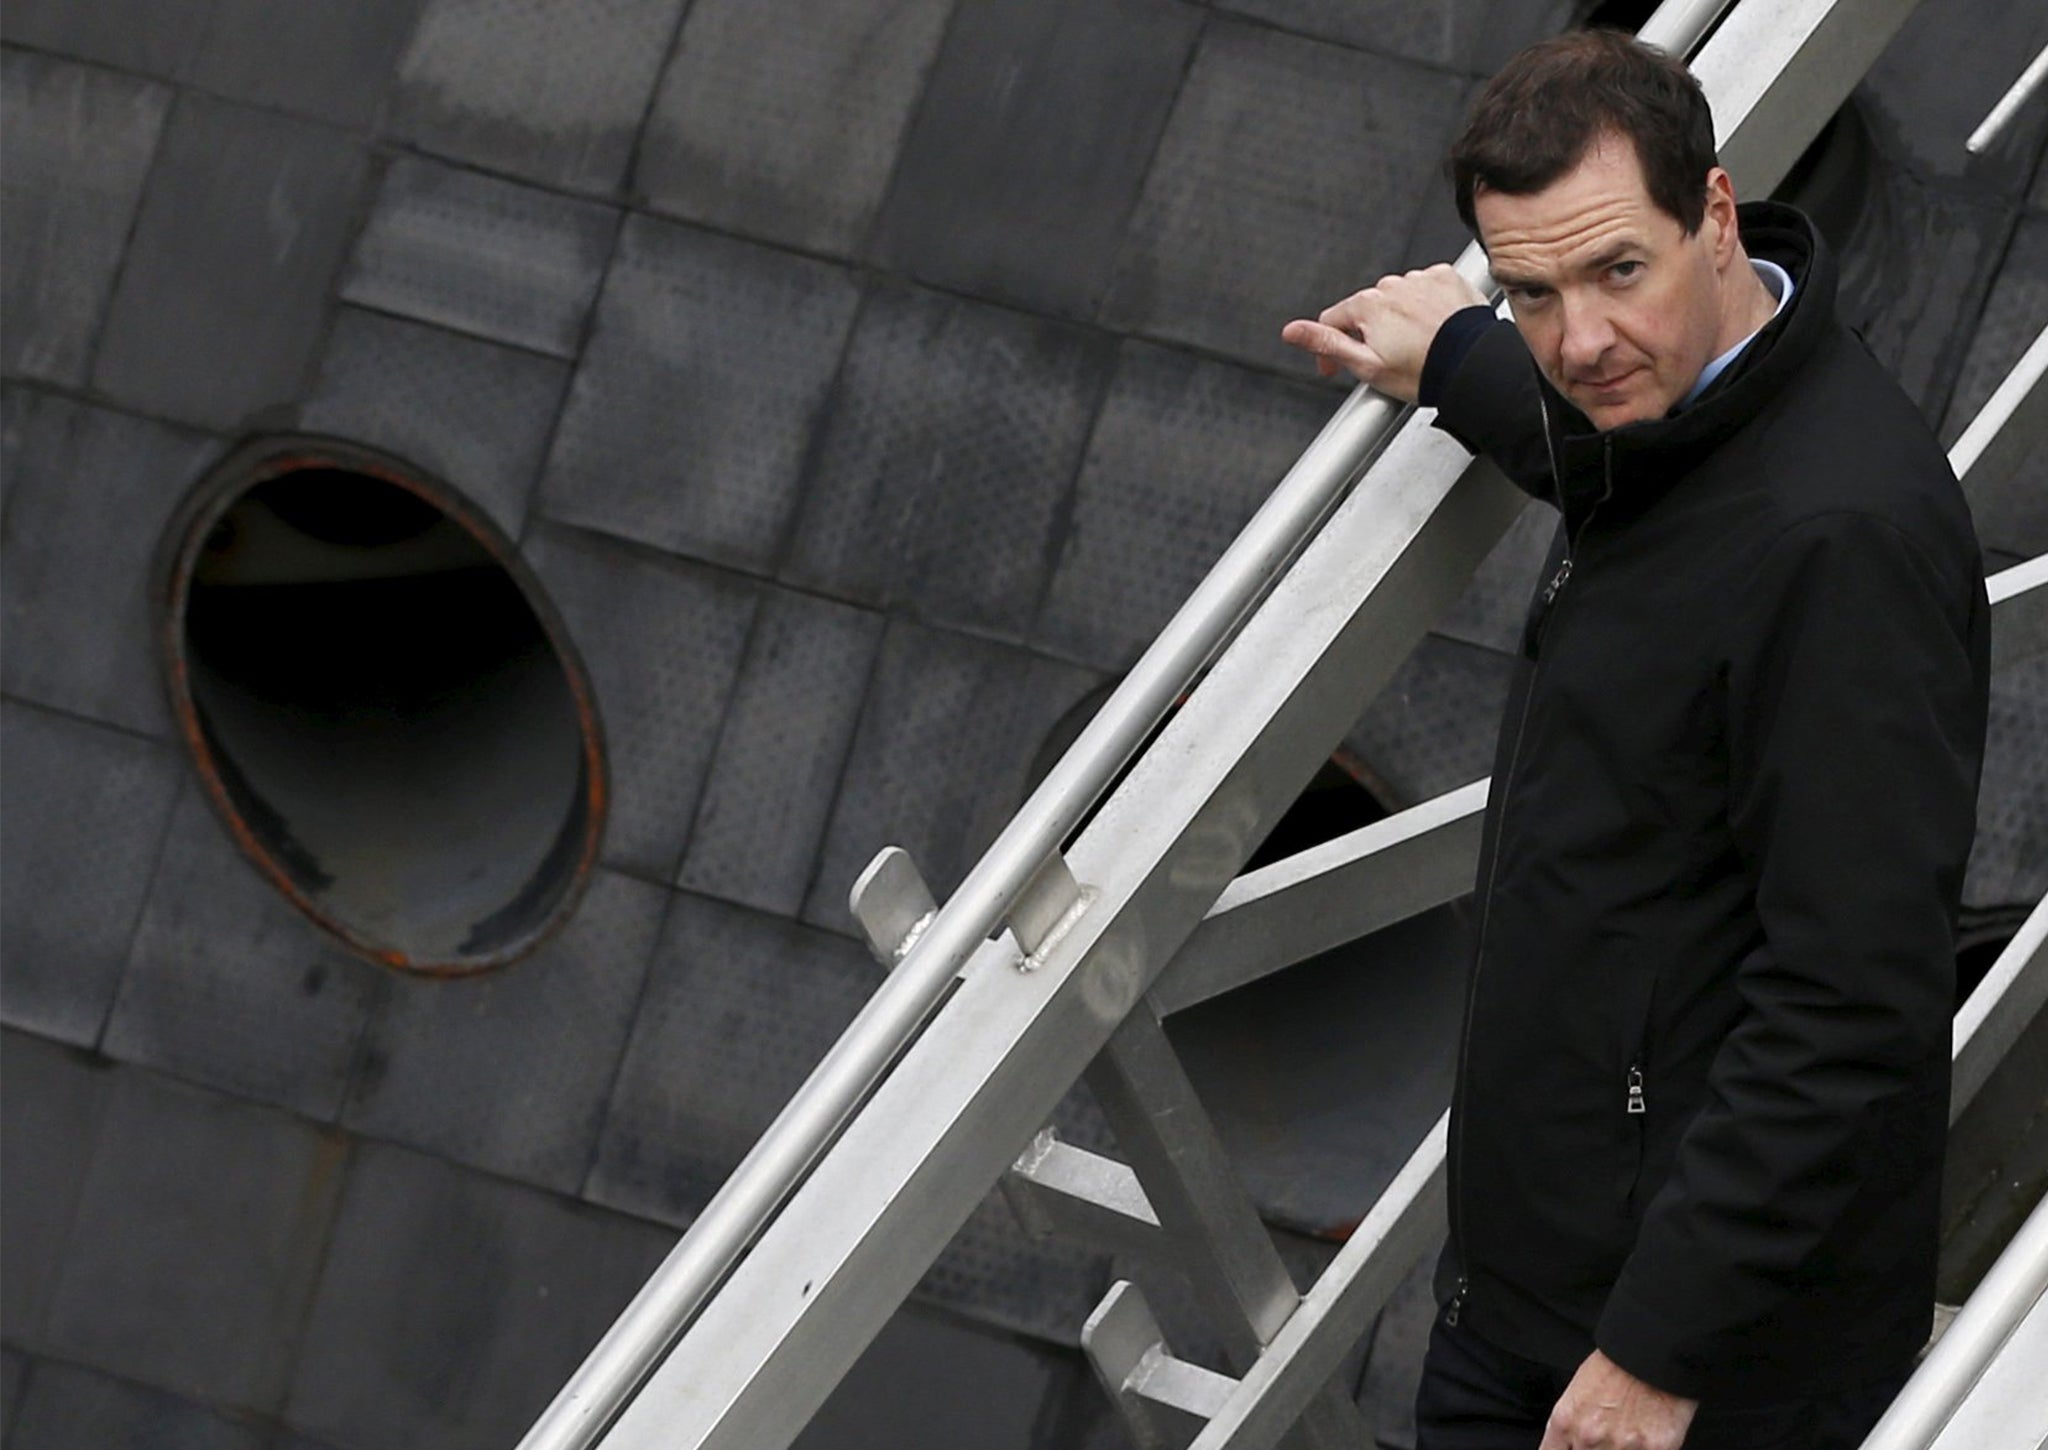 George Osborne walks down the stairs from a submarine during a visit to the Royal Navy's submarine base at Faslane on August 31, 2015 in Faslane Scotland